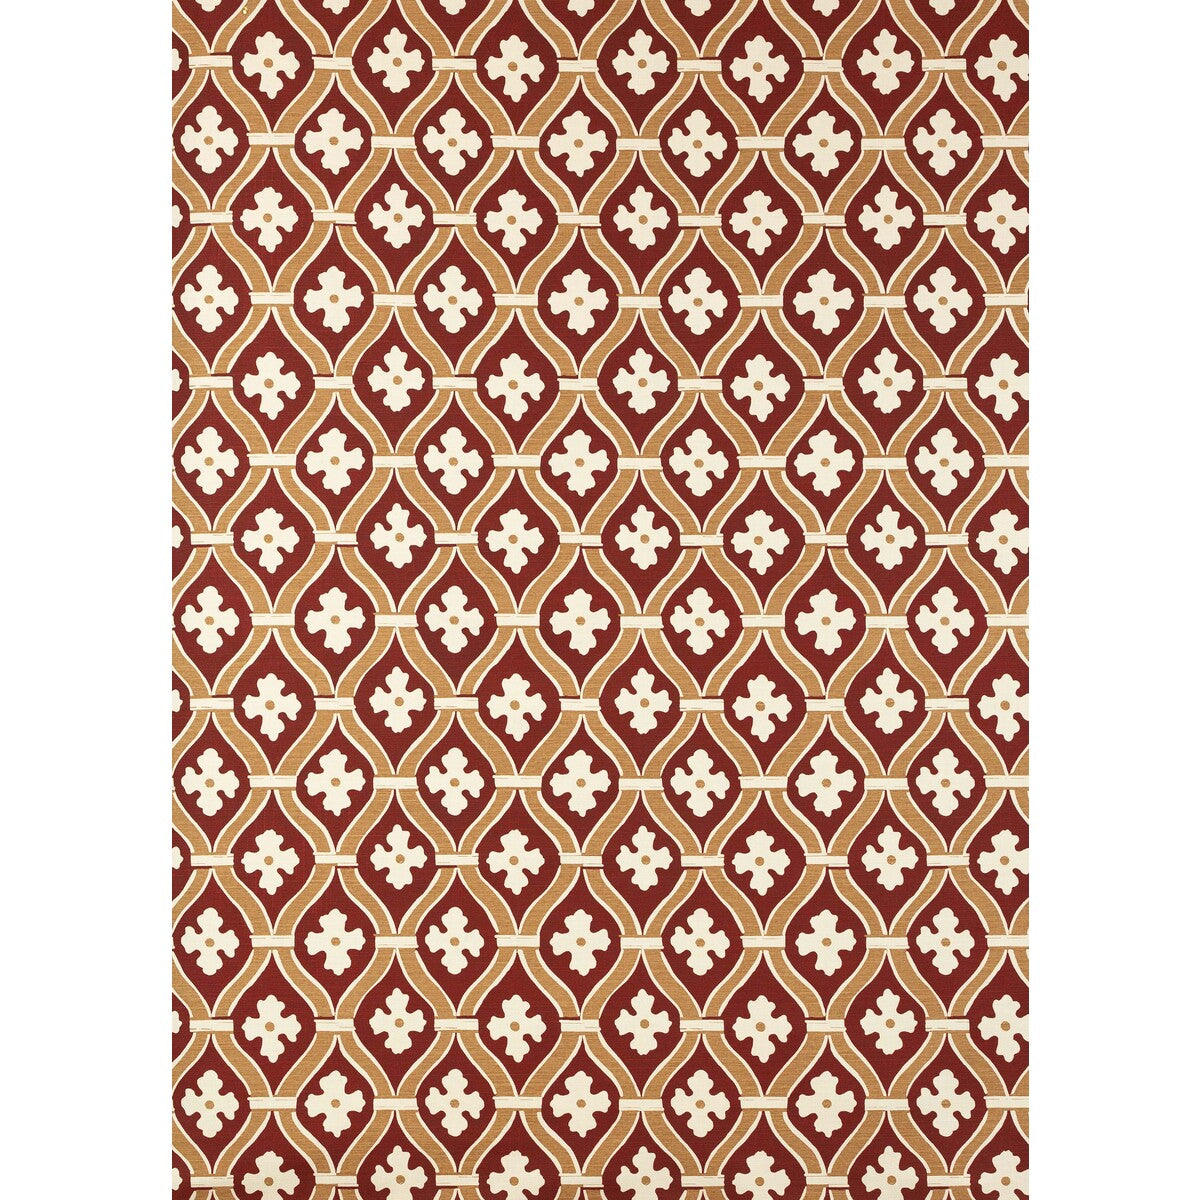 Byblos fabric in rust/faded brown color - pattern 2022121.619.0 - by Lee Jofa in the Paolo Moschino Persepolis collection